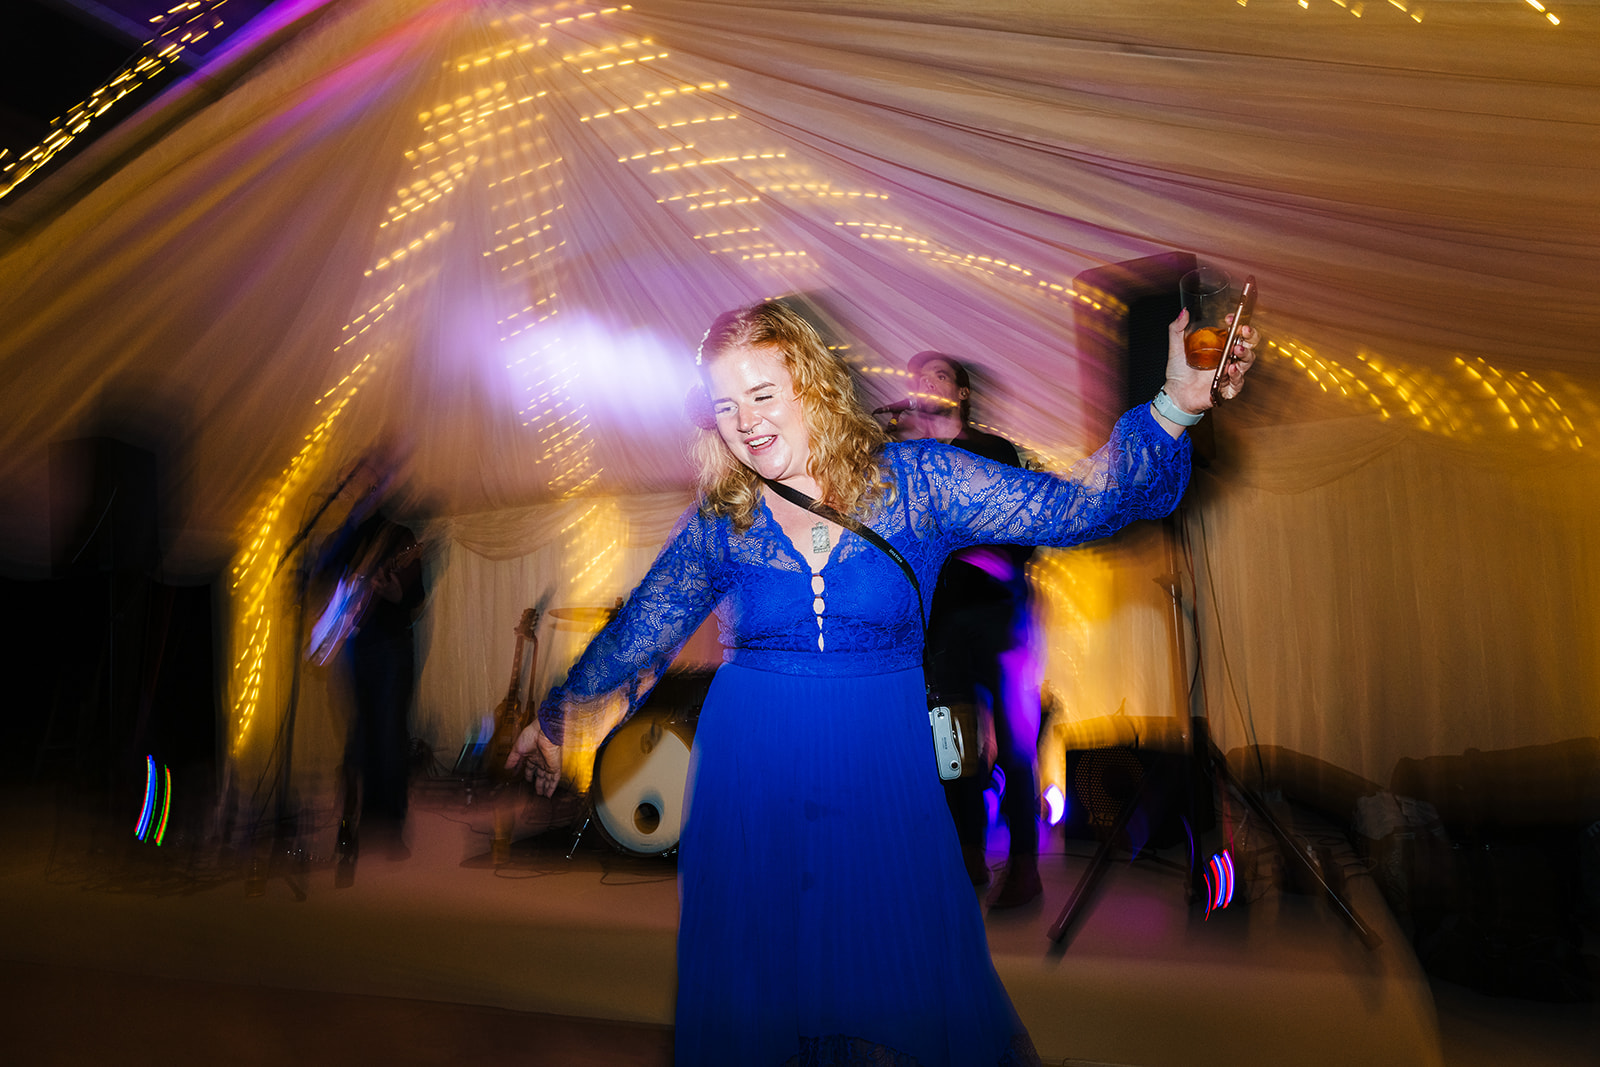 Wedding guests dance to the music from the live band
